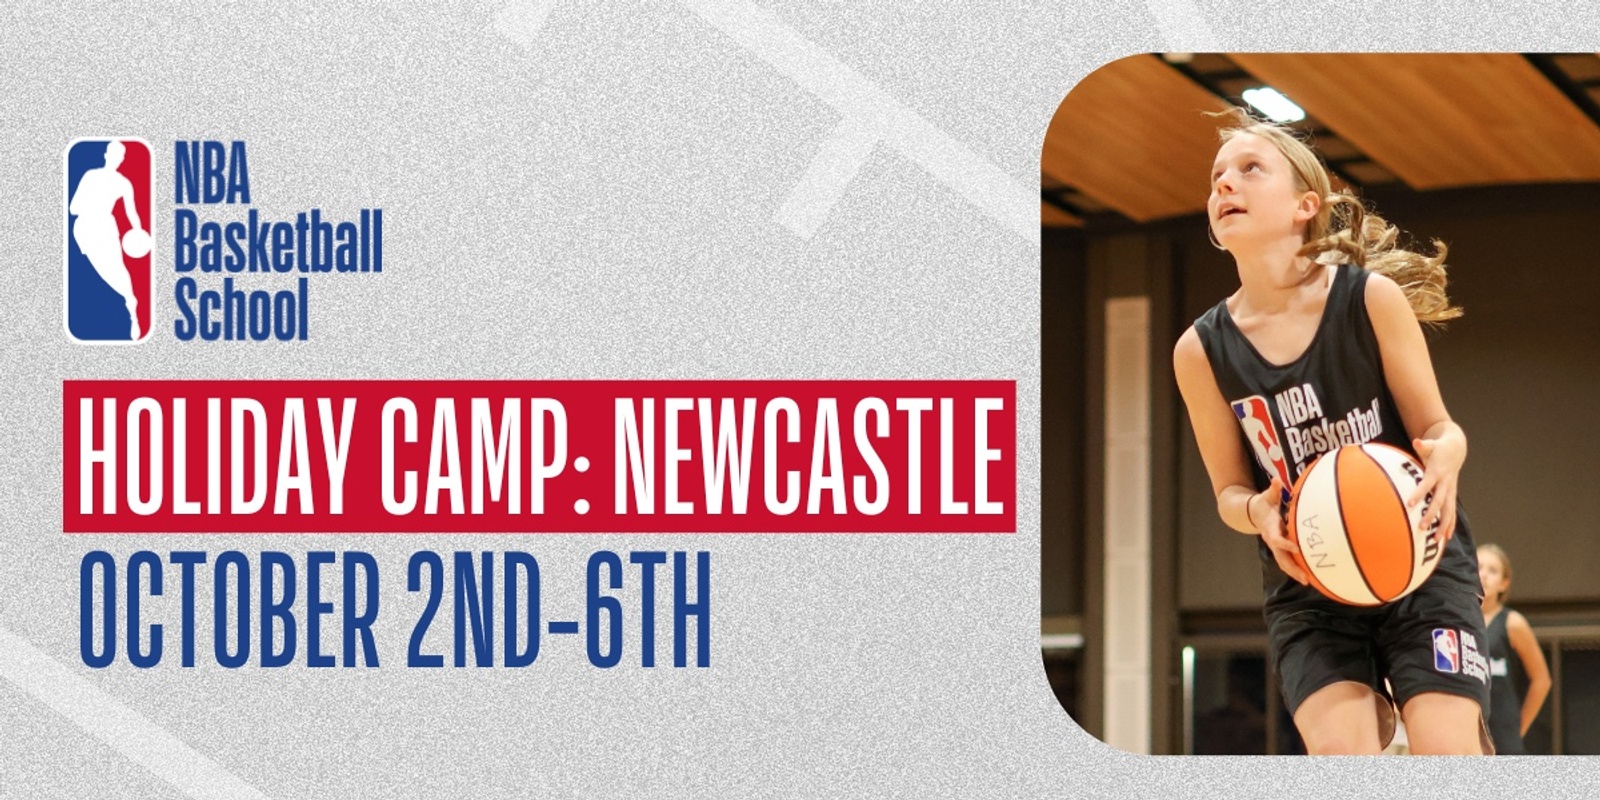 Banner image for October 2nd - 6th 2023 Holiday Camp in Newcastle at NBA Basketball School Australia